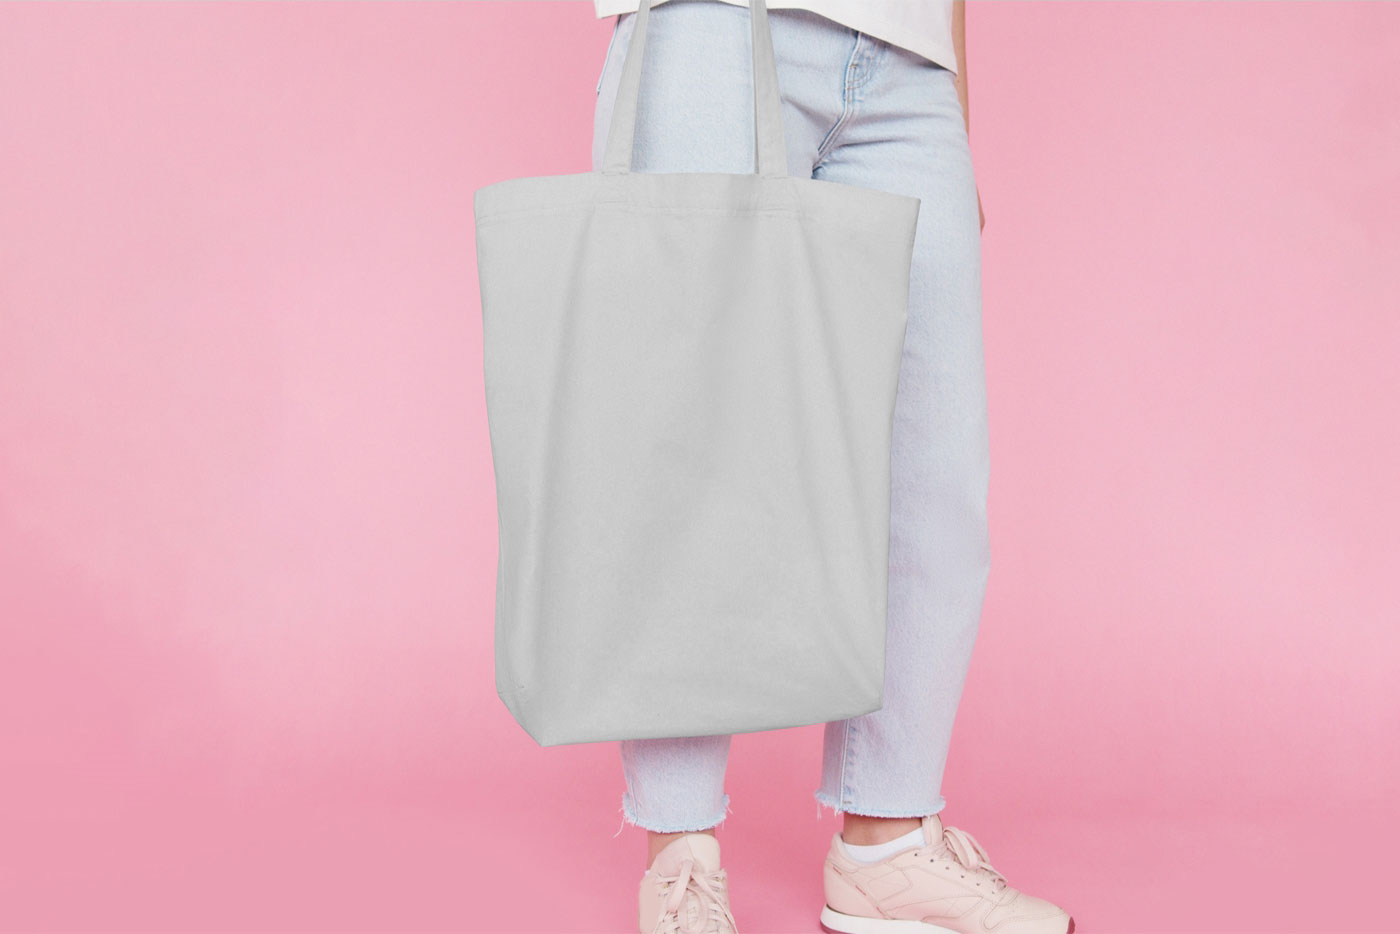 Front View of Handholding Canvas Jeans Bag Mockup FREE PSD